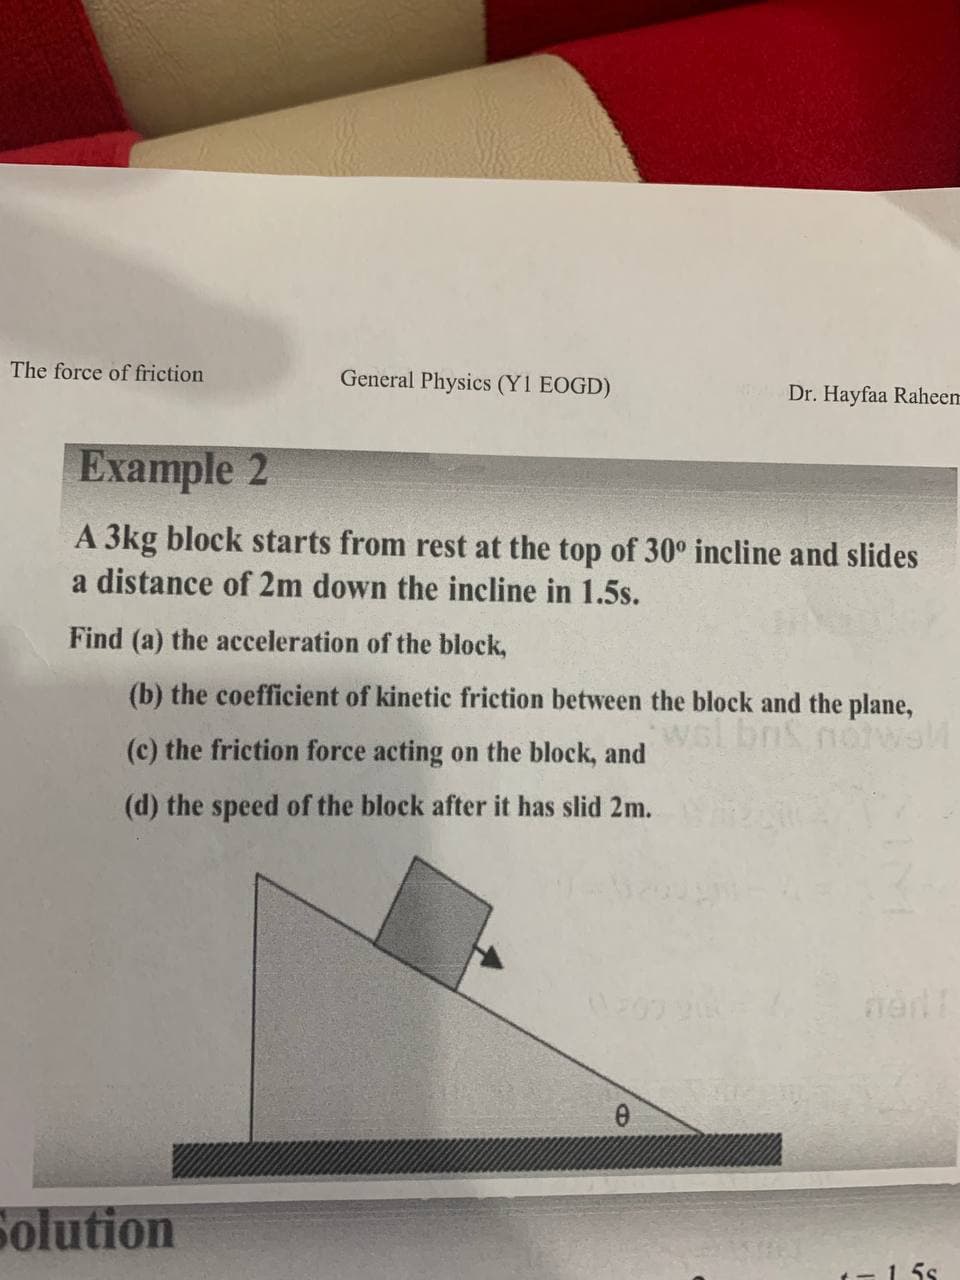 The force of friction
General Physics (Y1 EOGD)
Dr. Hayfaa Raheem
Example 2
A 3kg block starts from rest at the top of 30° incline and slides
a distance of 2m down the incline in 1.5s.
Find (a) the acceleration of the block,
(b) the coefficient of kinetic friction between the block and the plane,
wel bnS nowaM
(c) the friction force acting on the block, and
(d) the speed of the block after it has slid 2m.
Solution
1. 5s
